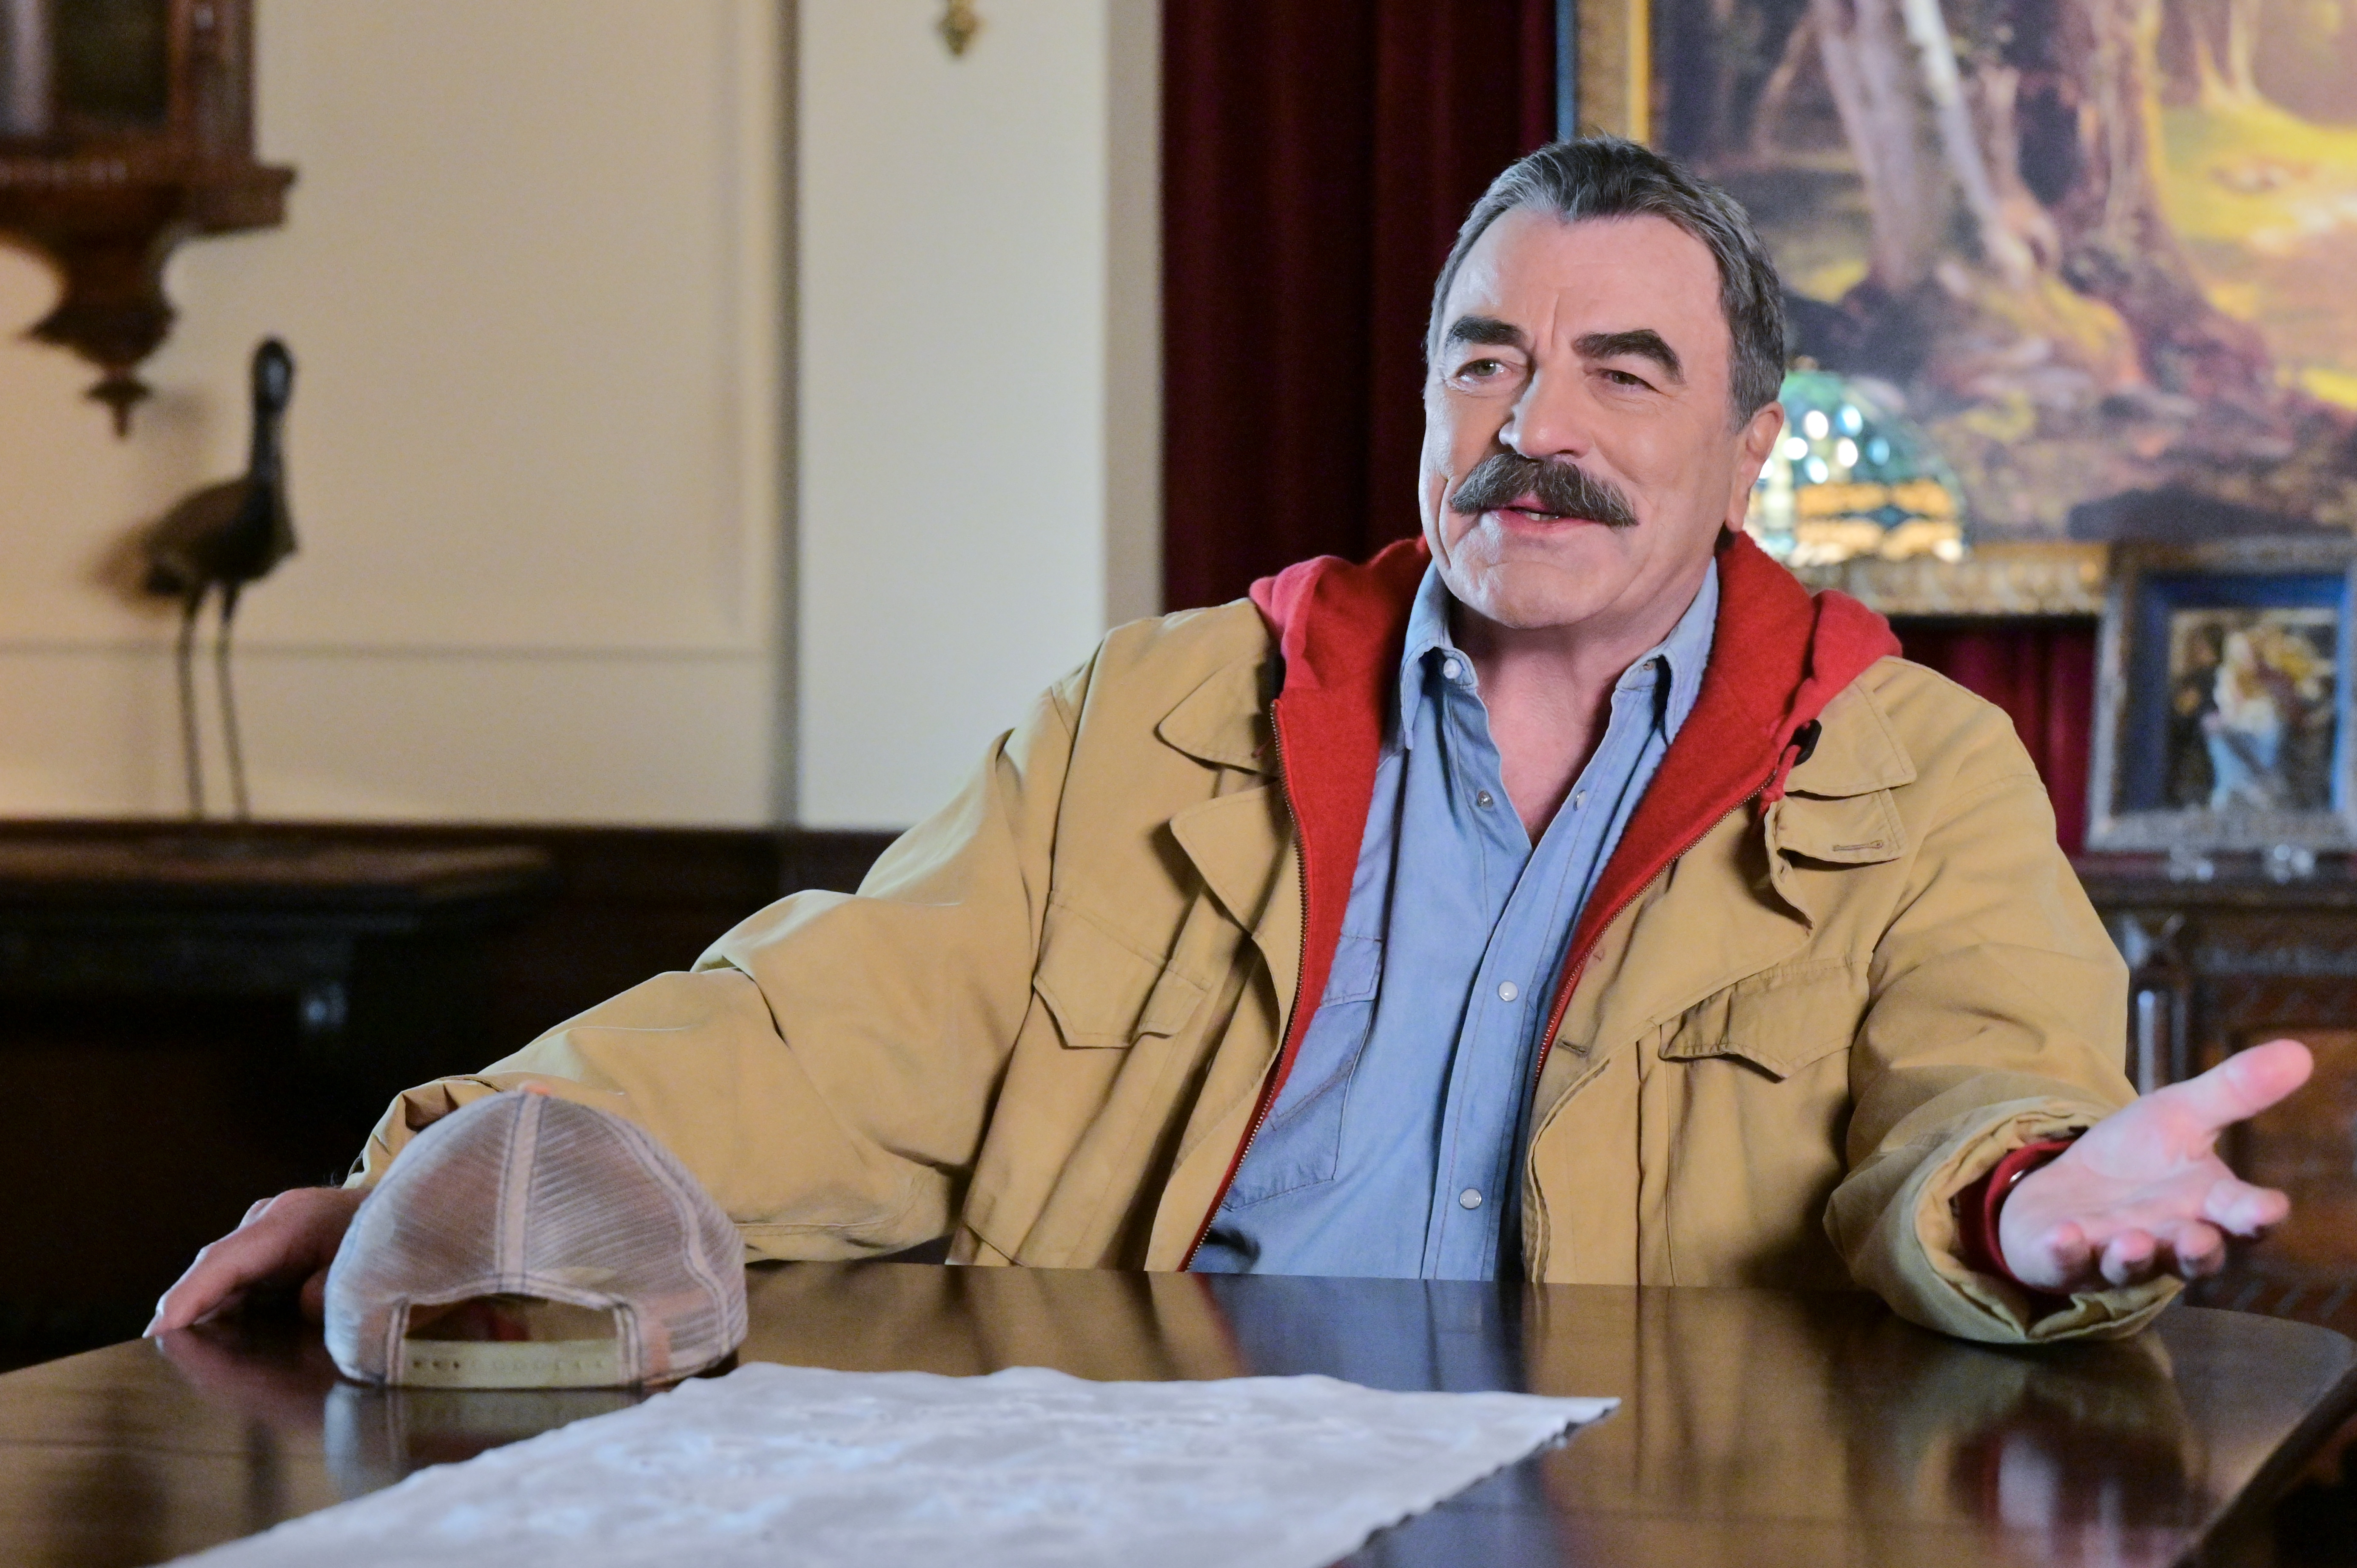 Tom Selleck as Frank Reagan on the set of "Blue Bloods" on October 7, 2022 | Source: Getty Images